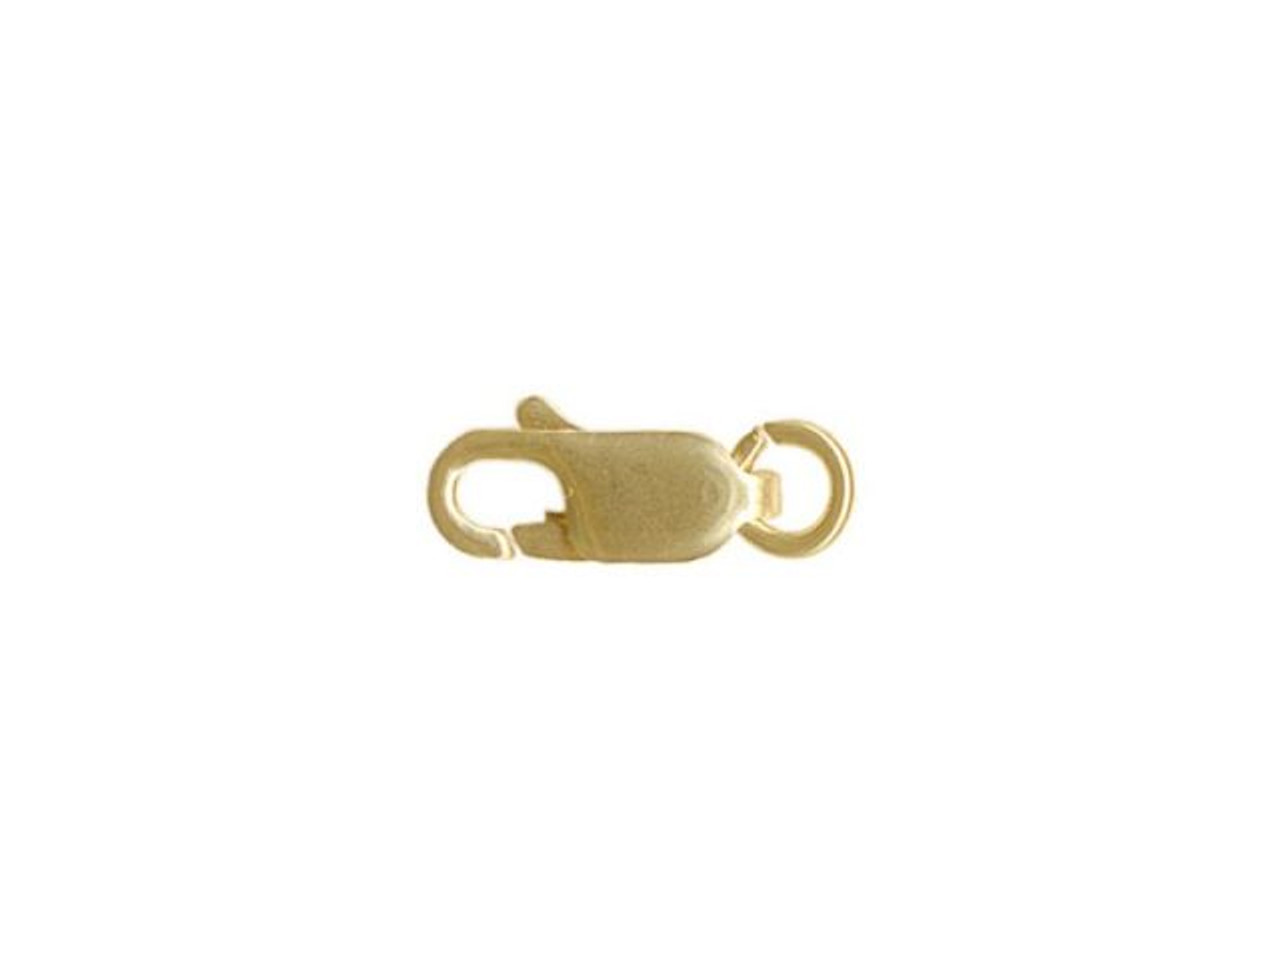 1/20 14K Gold Filled Oval Lobster Clasp (1 piece).